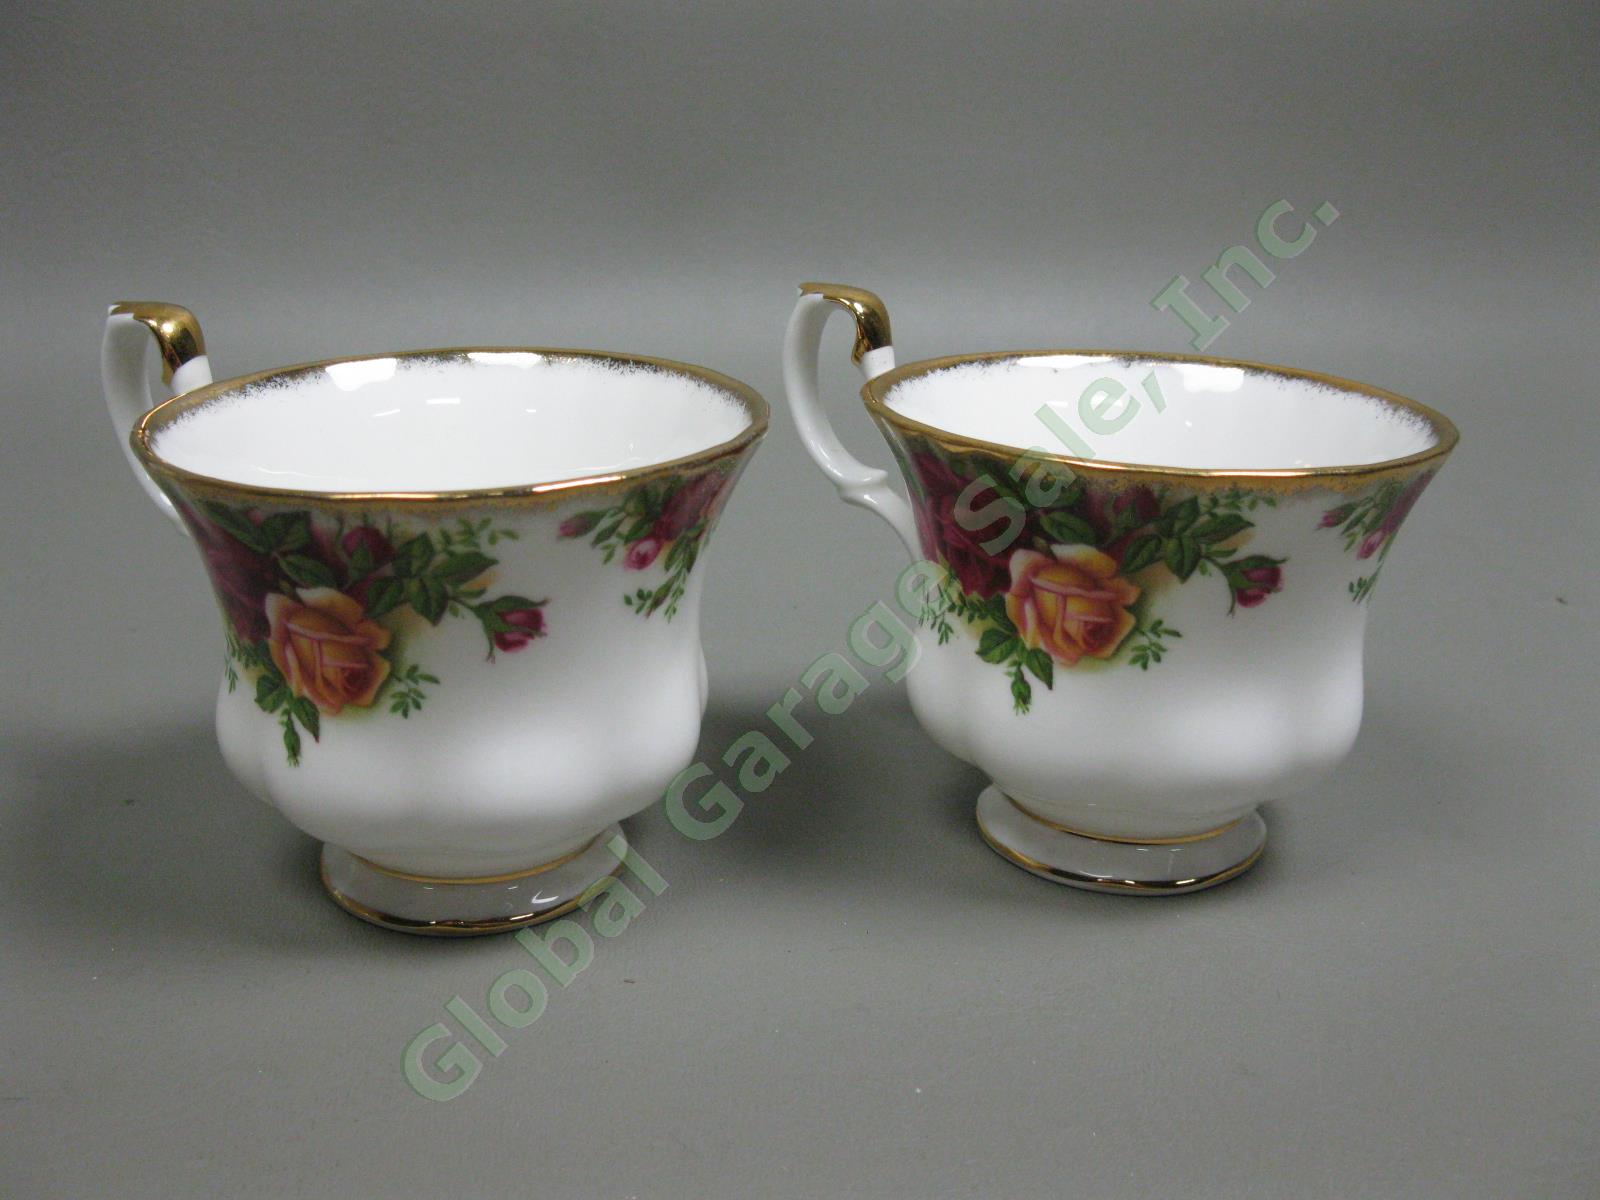 8 Royal Albert Old Country Roses Footed Tea Cup/Saucer Gold Trim Bone China Set 17